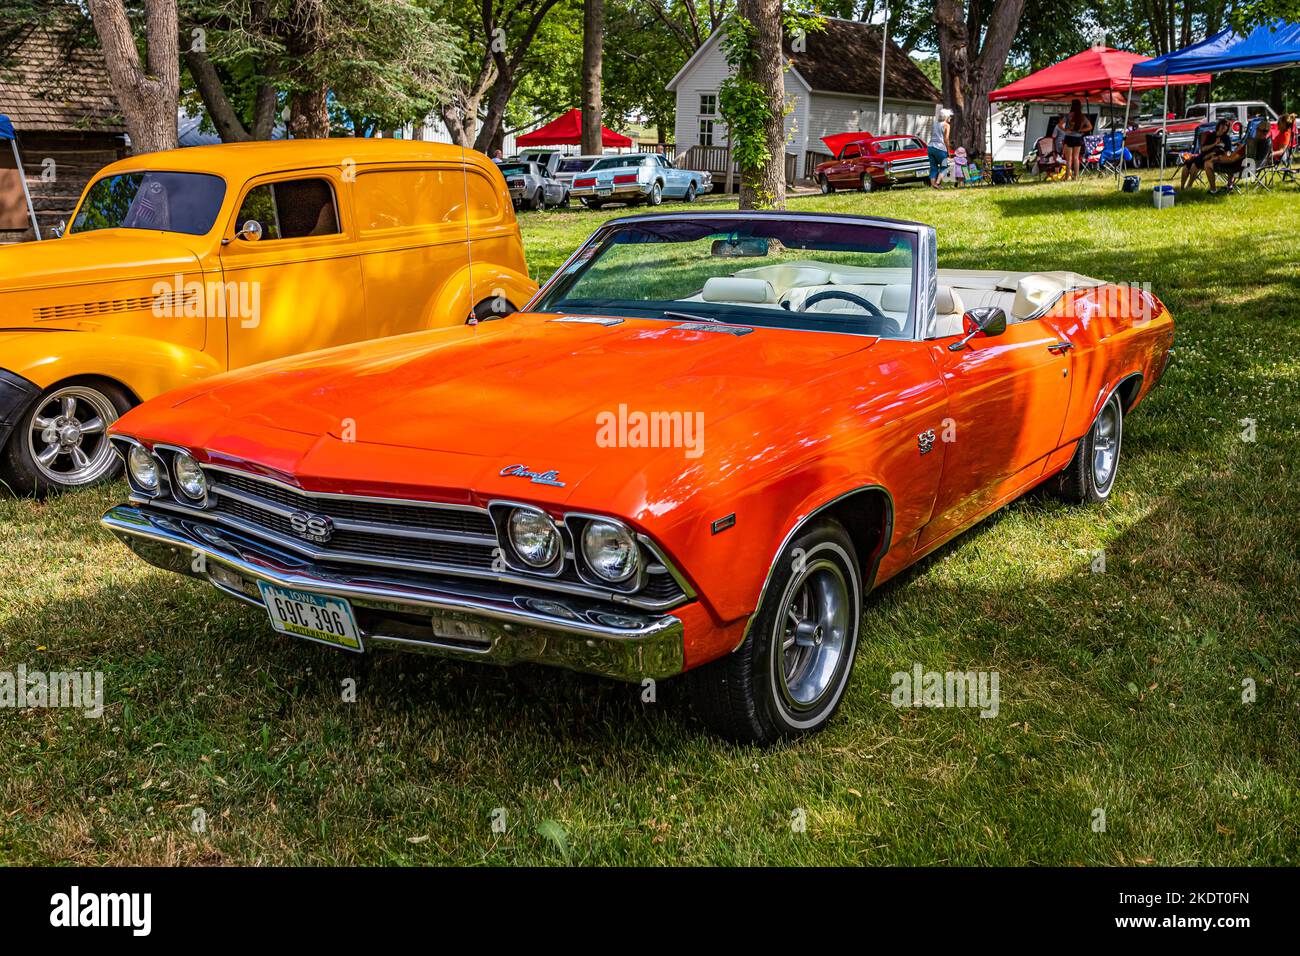 Des Moines, IA - July 02, 2022: High perspective front corner view of a 1969 Chevrolet Chevelle SS Convertible at a local car show. Stock Photo